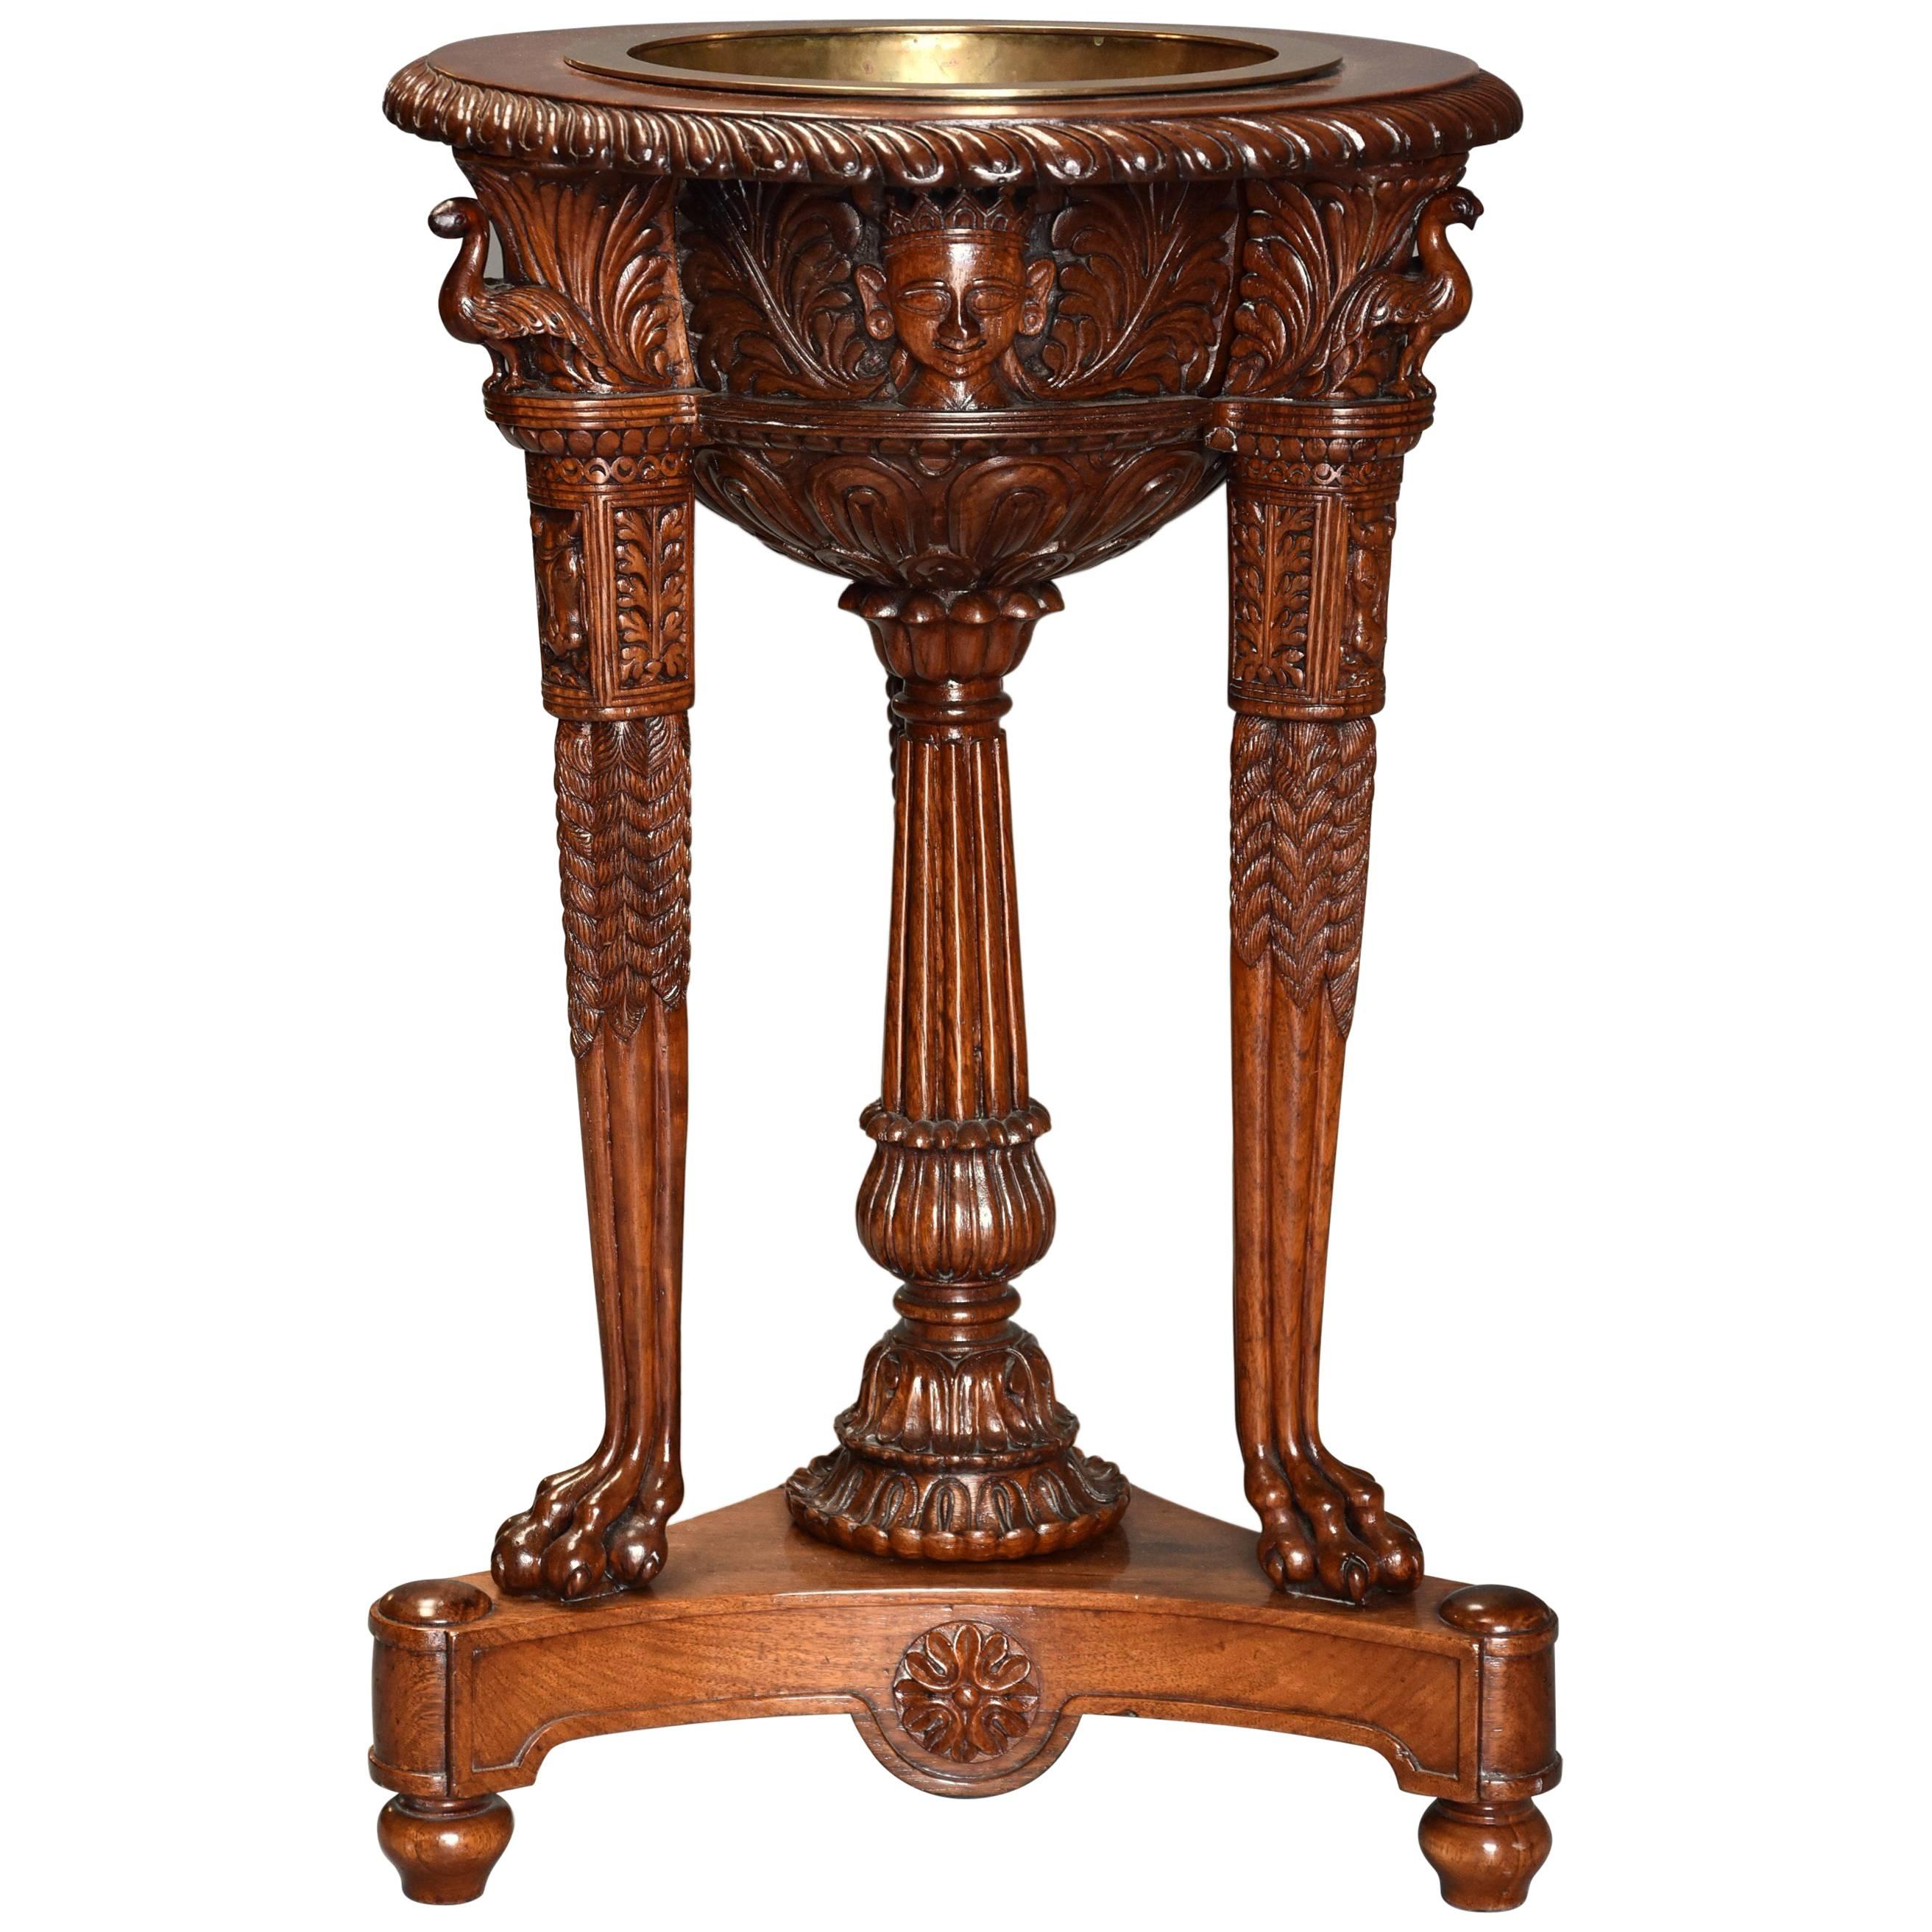 19th Century Highly Decorative Indian hardwood Carved Jardiniere/Wine Cooler For Sale